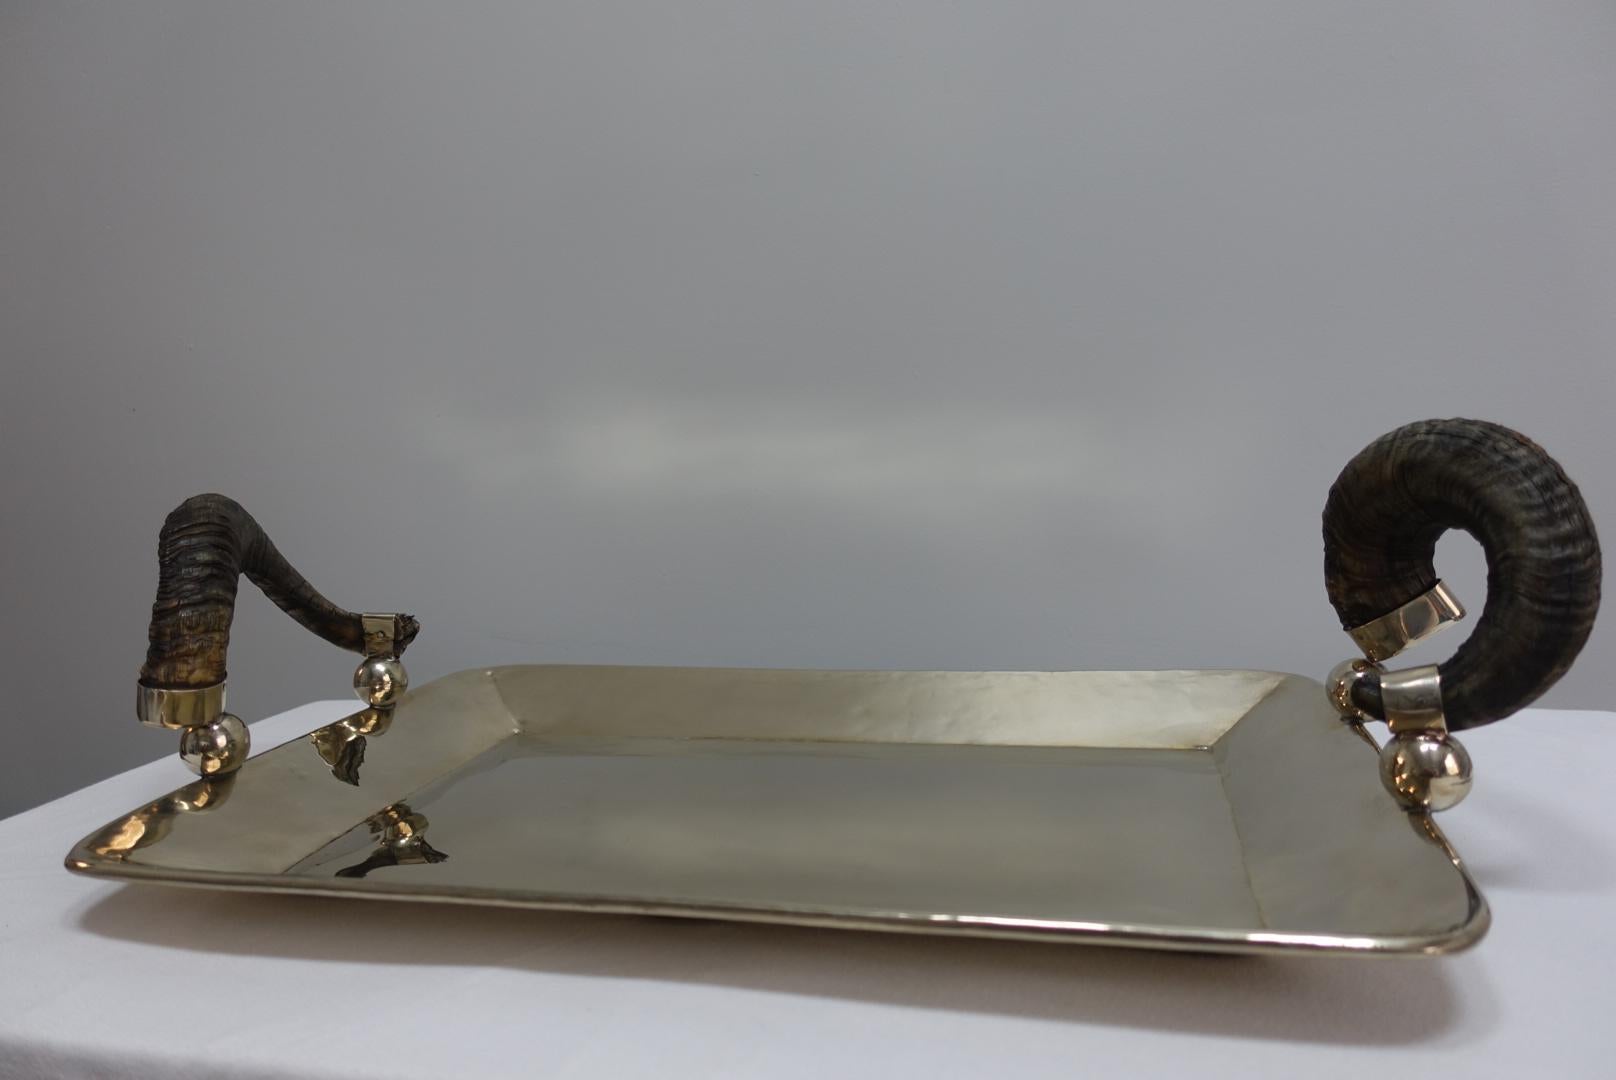 Silver Serving tray with rams horn handles offered for sale is a large elegant silver serving tray hand fitted with rams' horn handles. The silver content is referred to as alpaca silver. A white metal alloy of copper, nickel and zinc. The horns